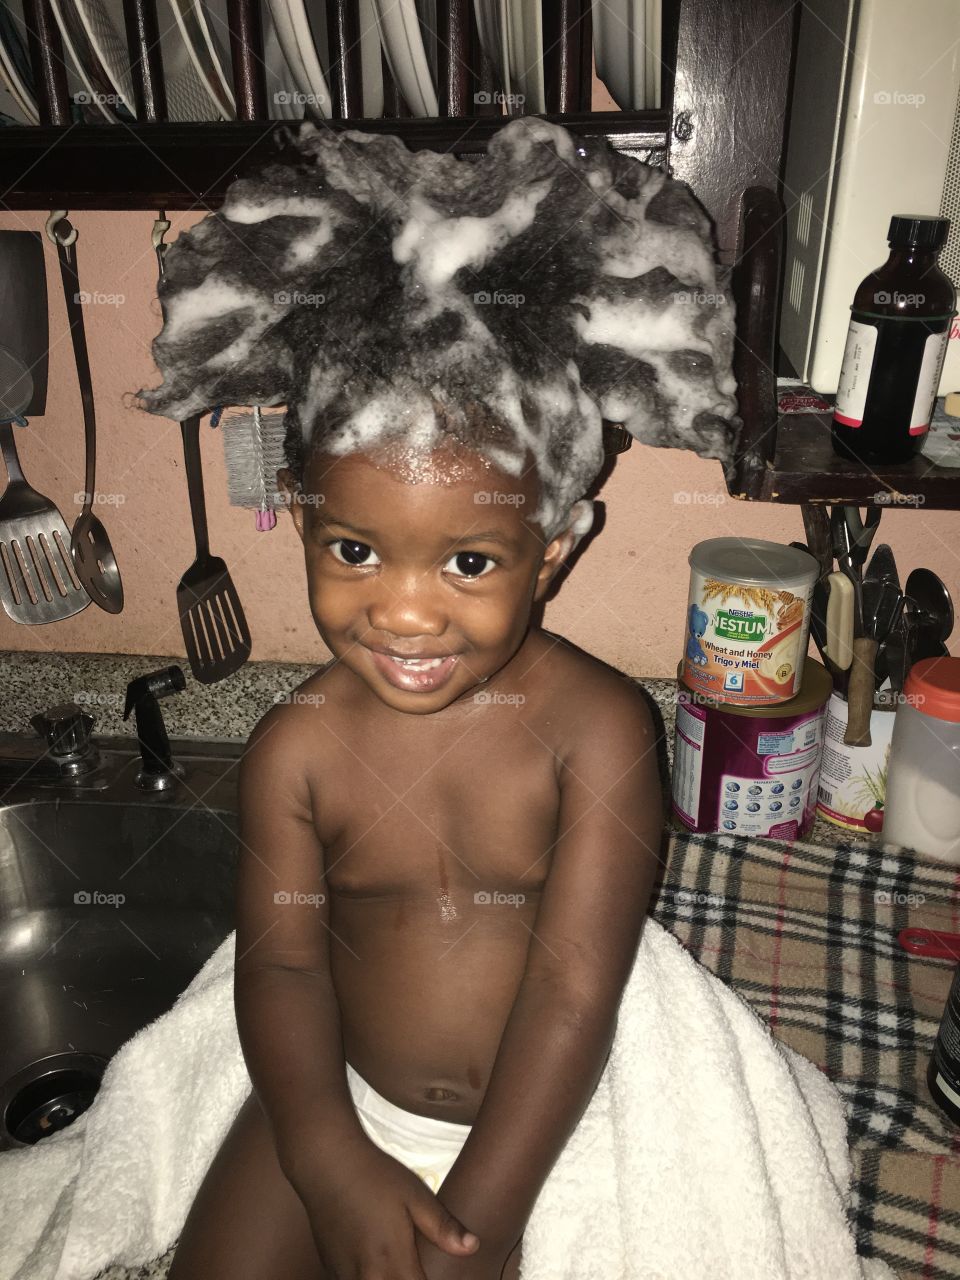 “Baby Hair Day” When my Cousin called me to snap a picture of her son. I had no ideal of the beautiful scene I was in for. I brought a smile to everyone’s face, hopefully it will bring a smile to yours as well